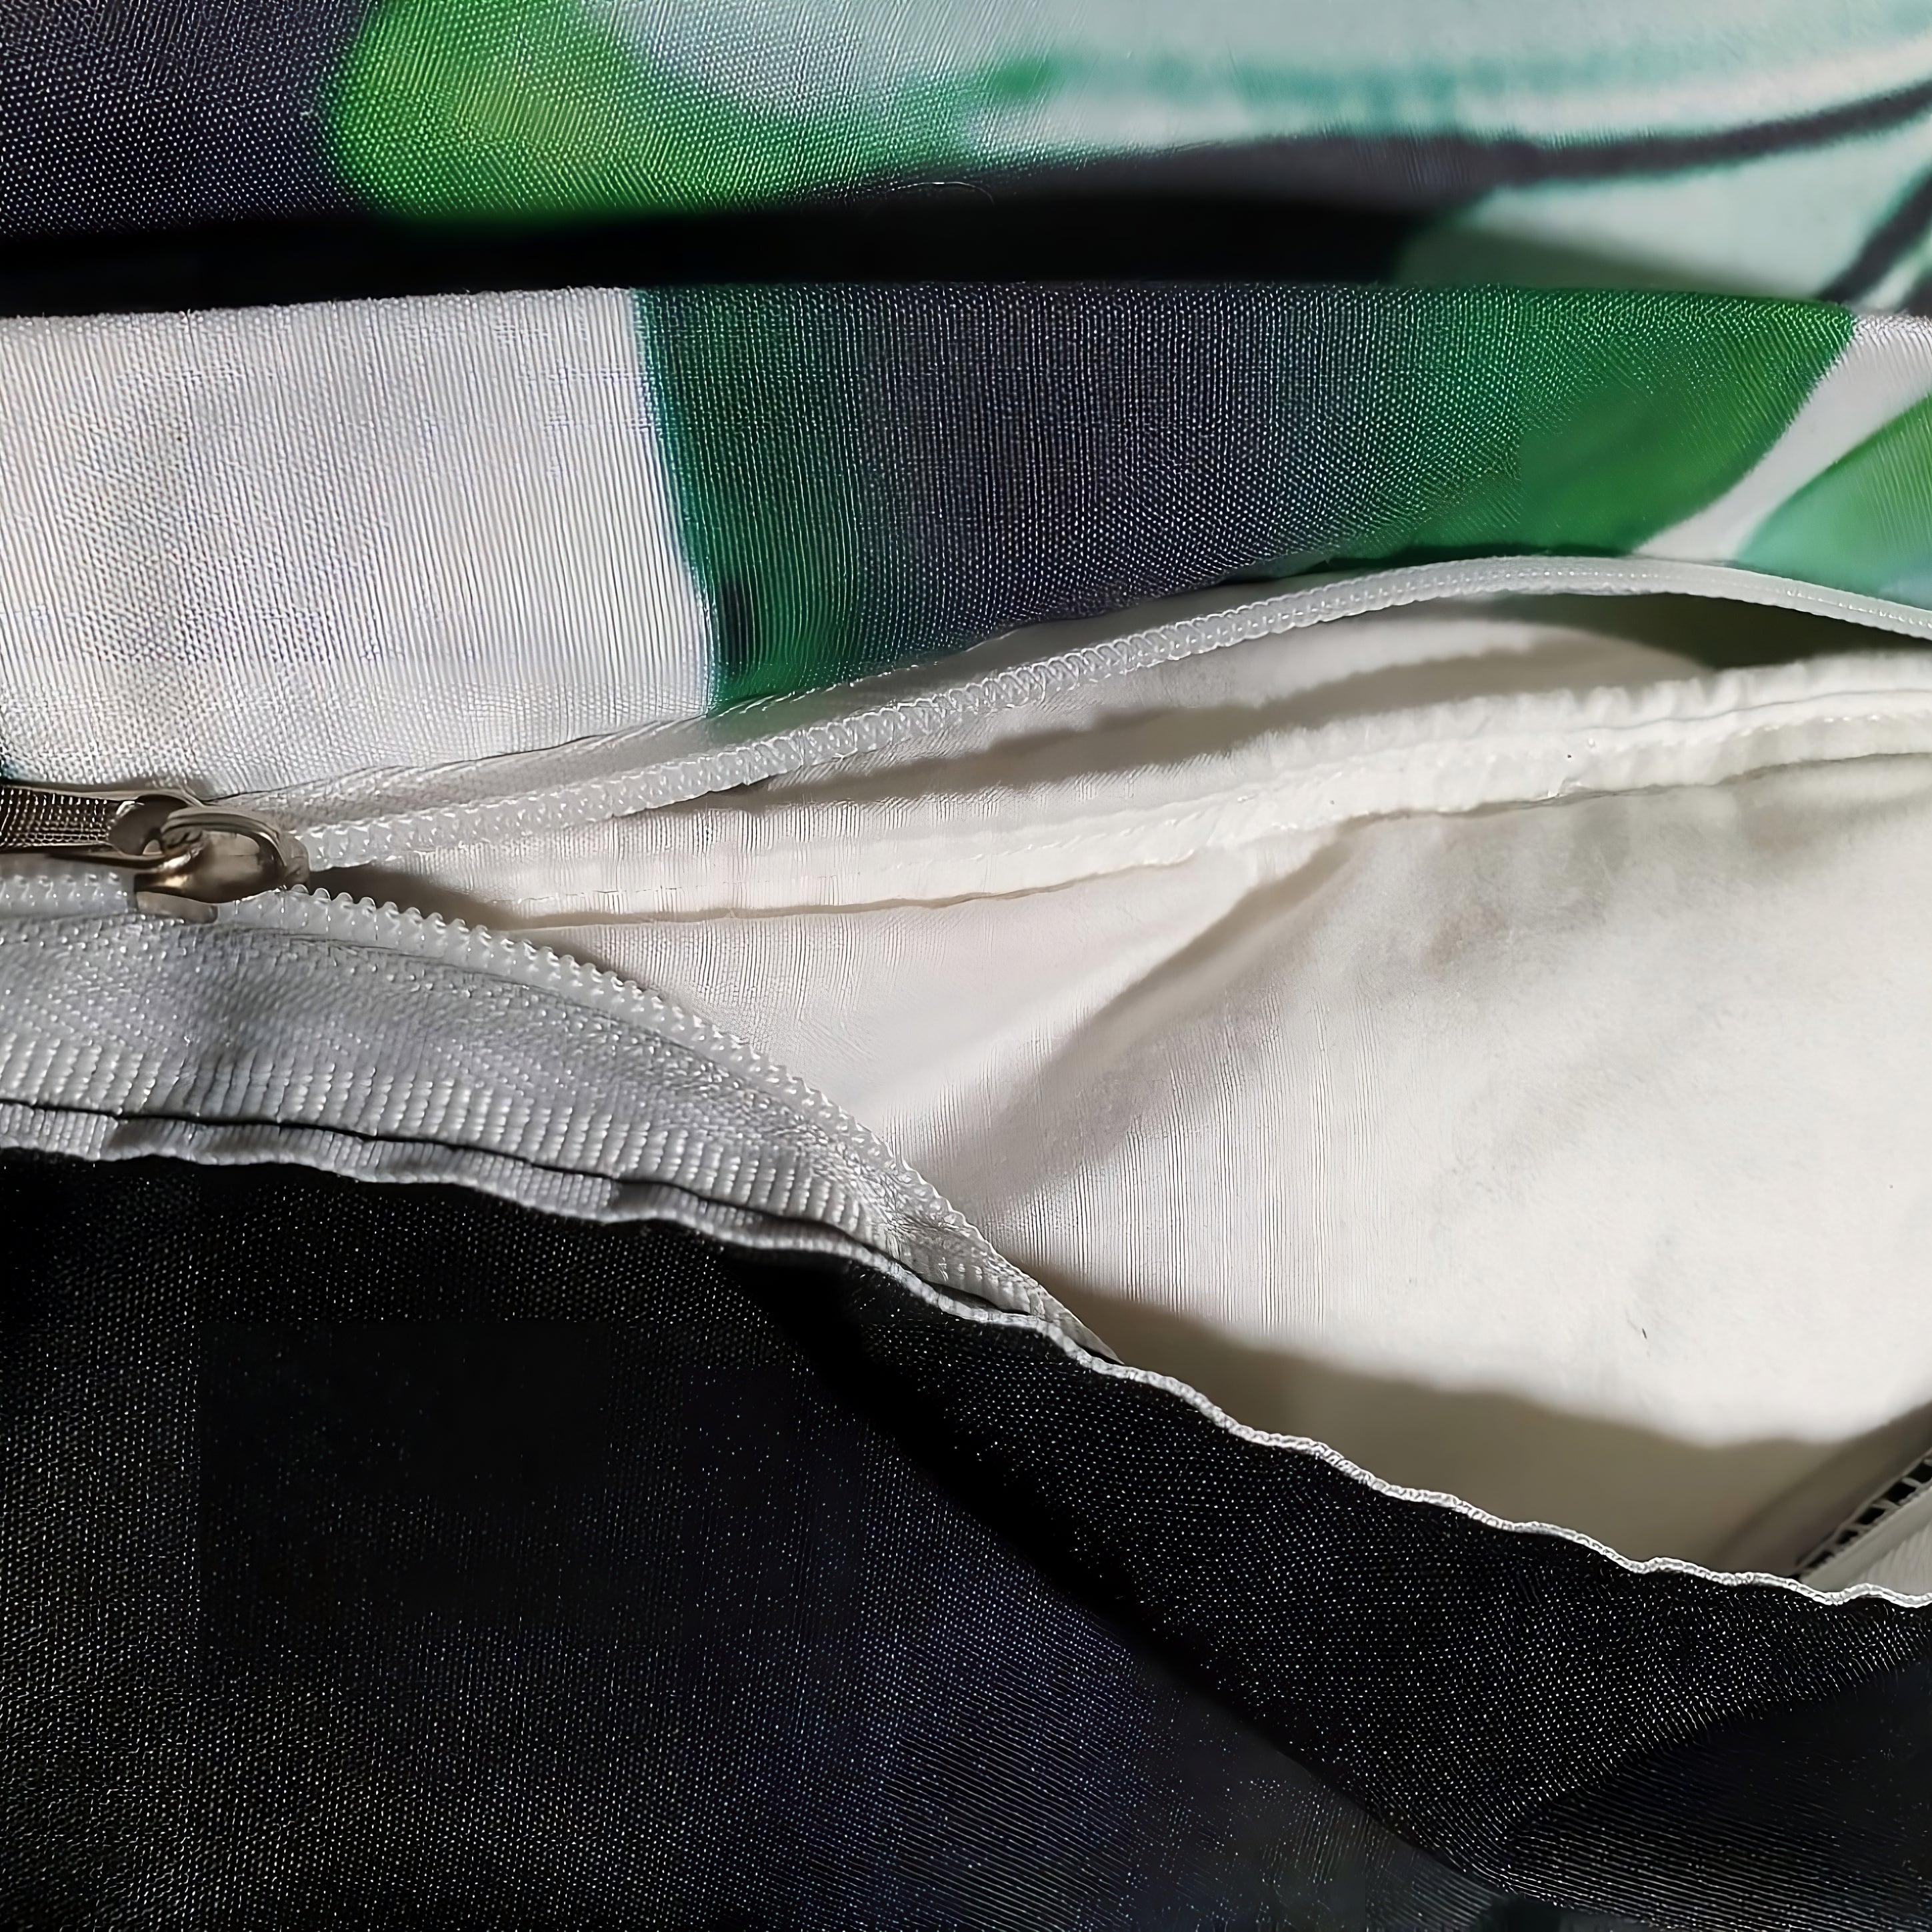 Zipper Closure - Ensure the cleanliness and protection of your doona with Doona zipper covers.